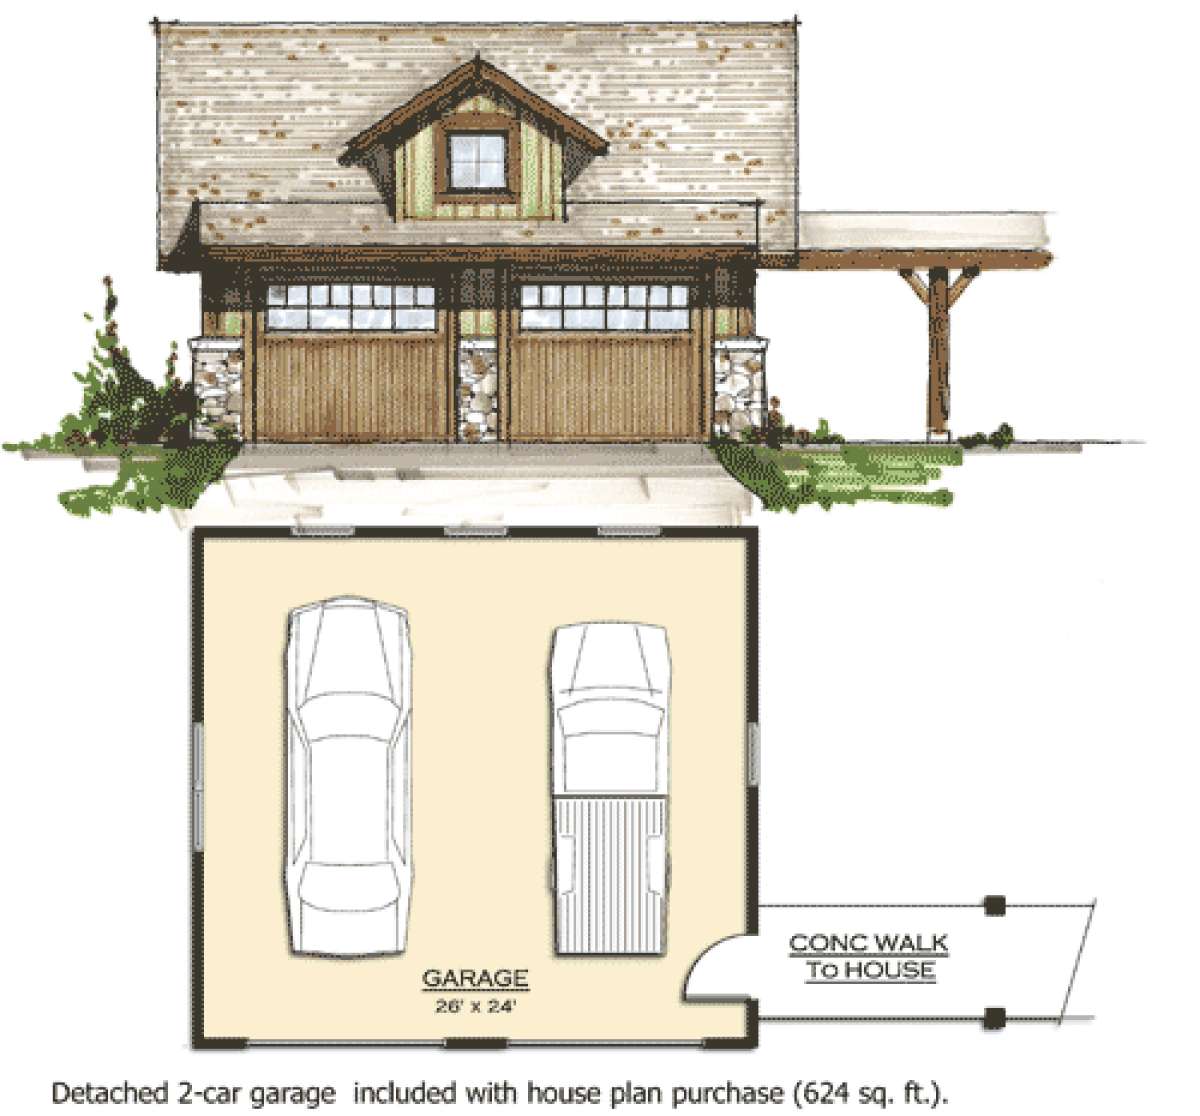 Garage for House Plan #8504-00090